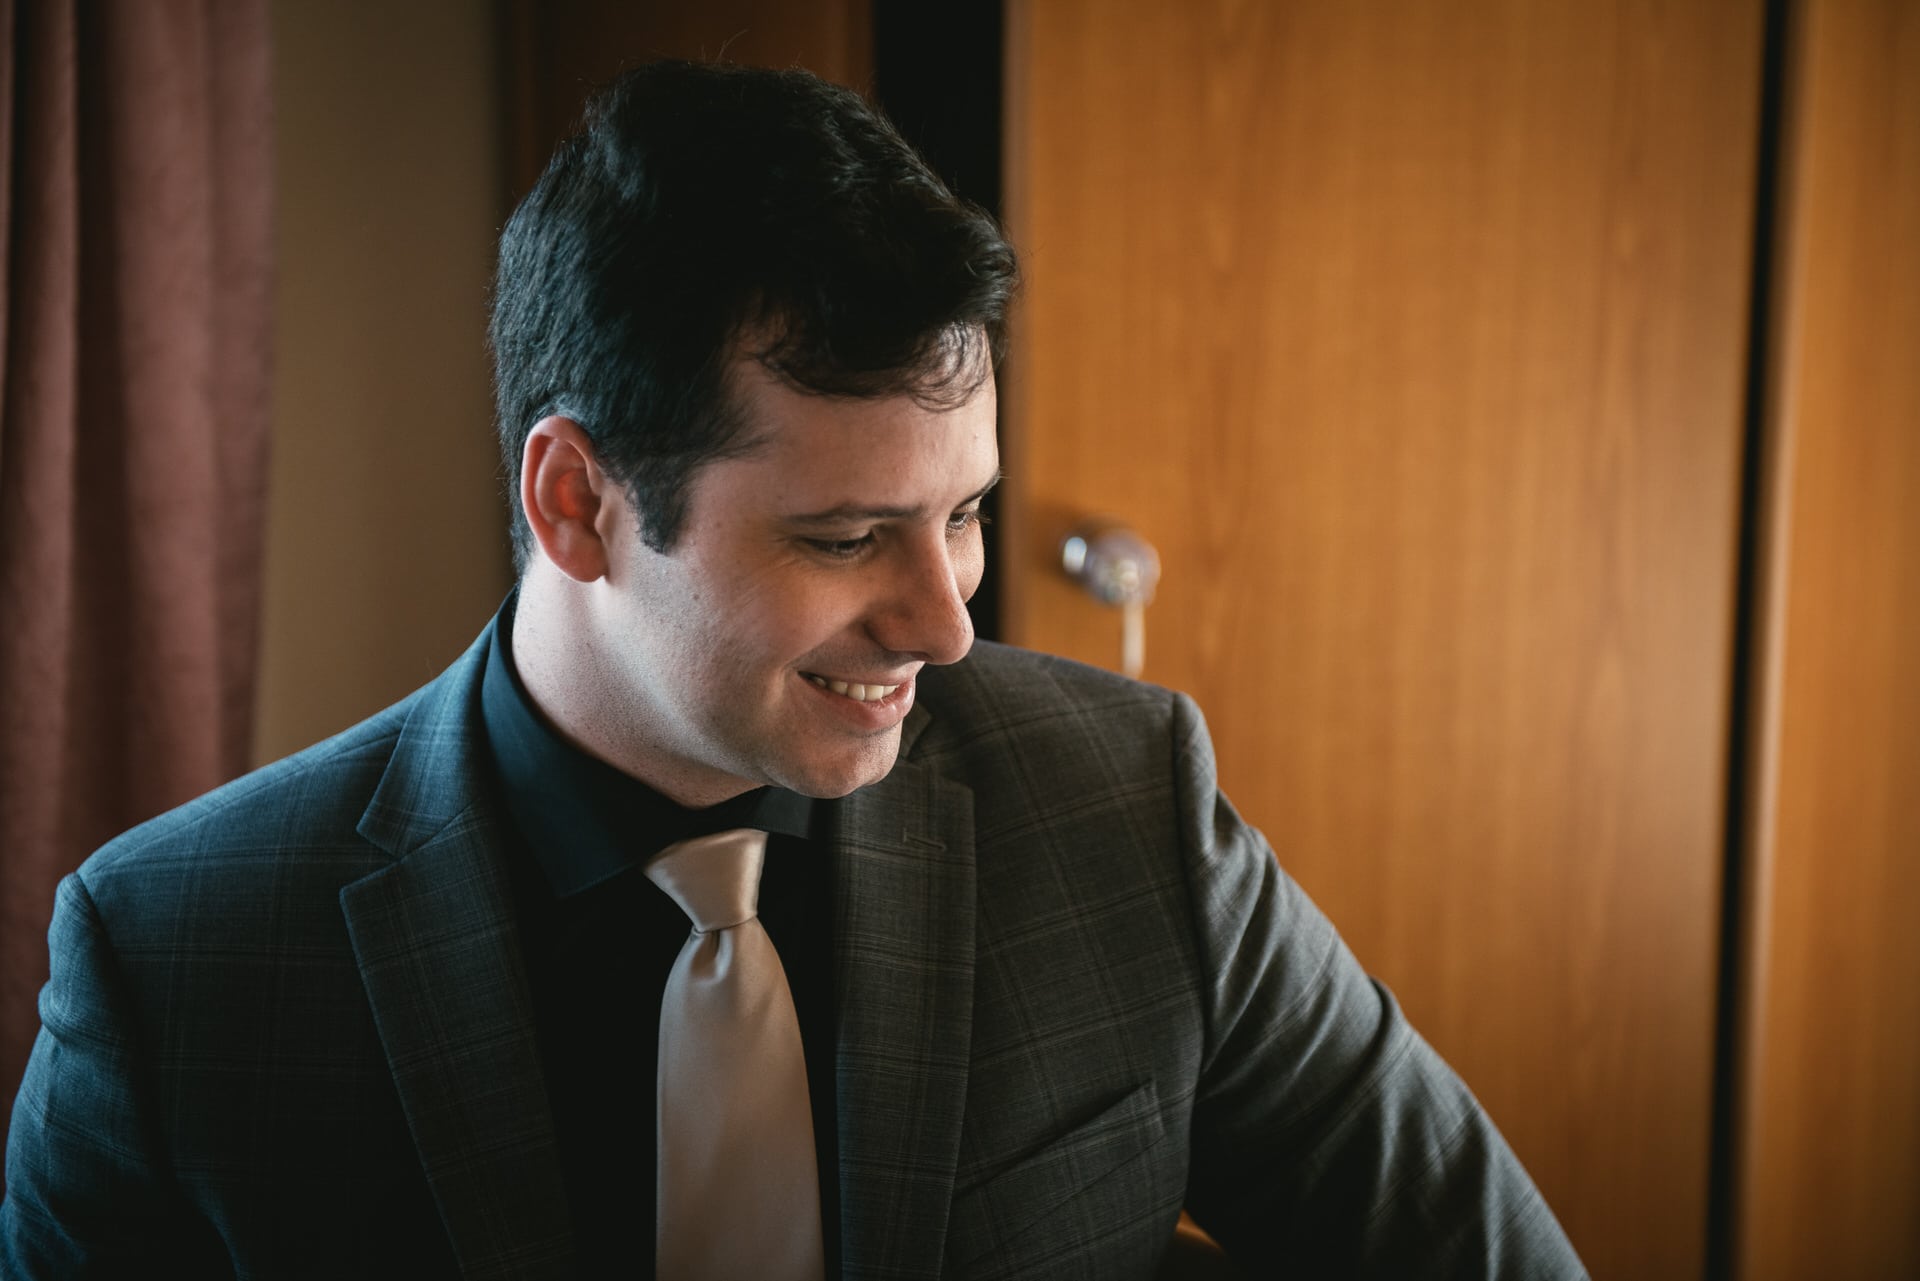 Groom smiling as he gets ready on his elopement day in Switzerland